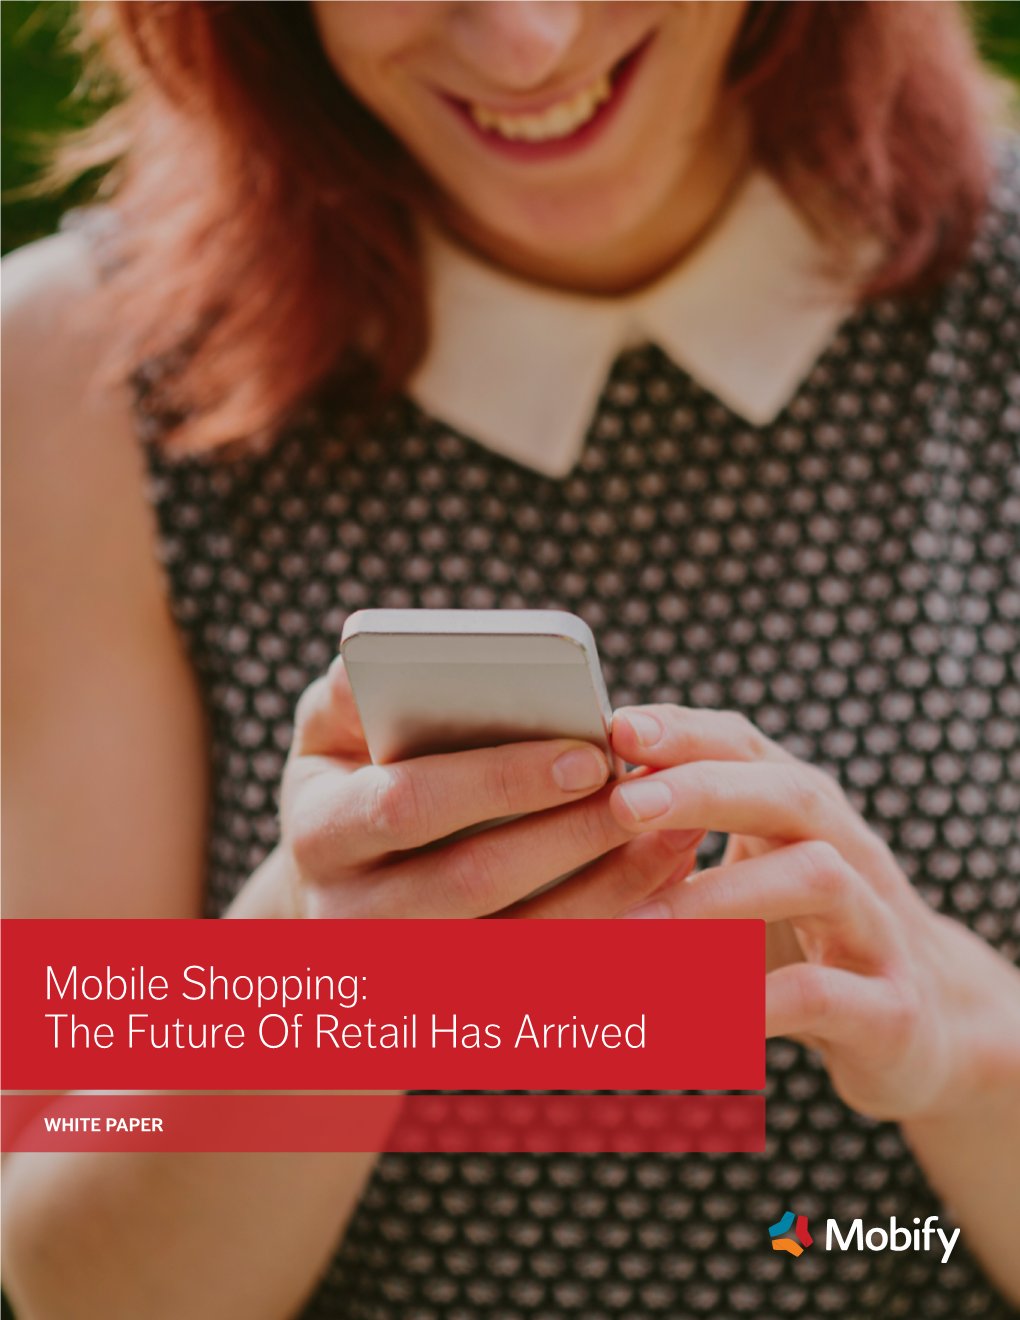 Mobile Shopping: the Future of Retail Has Arrived